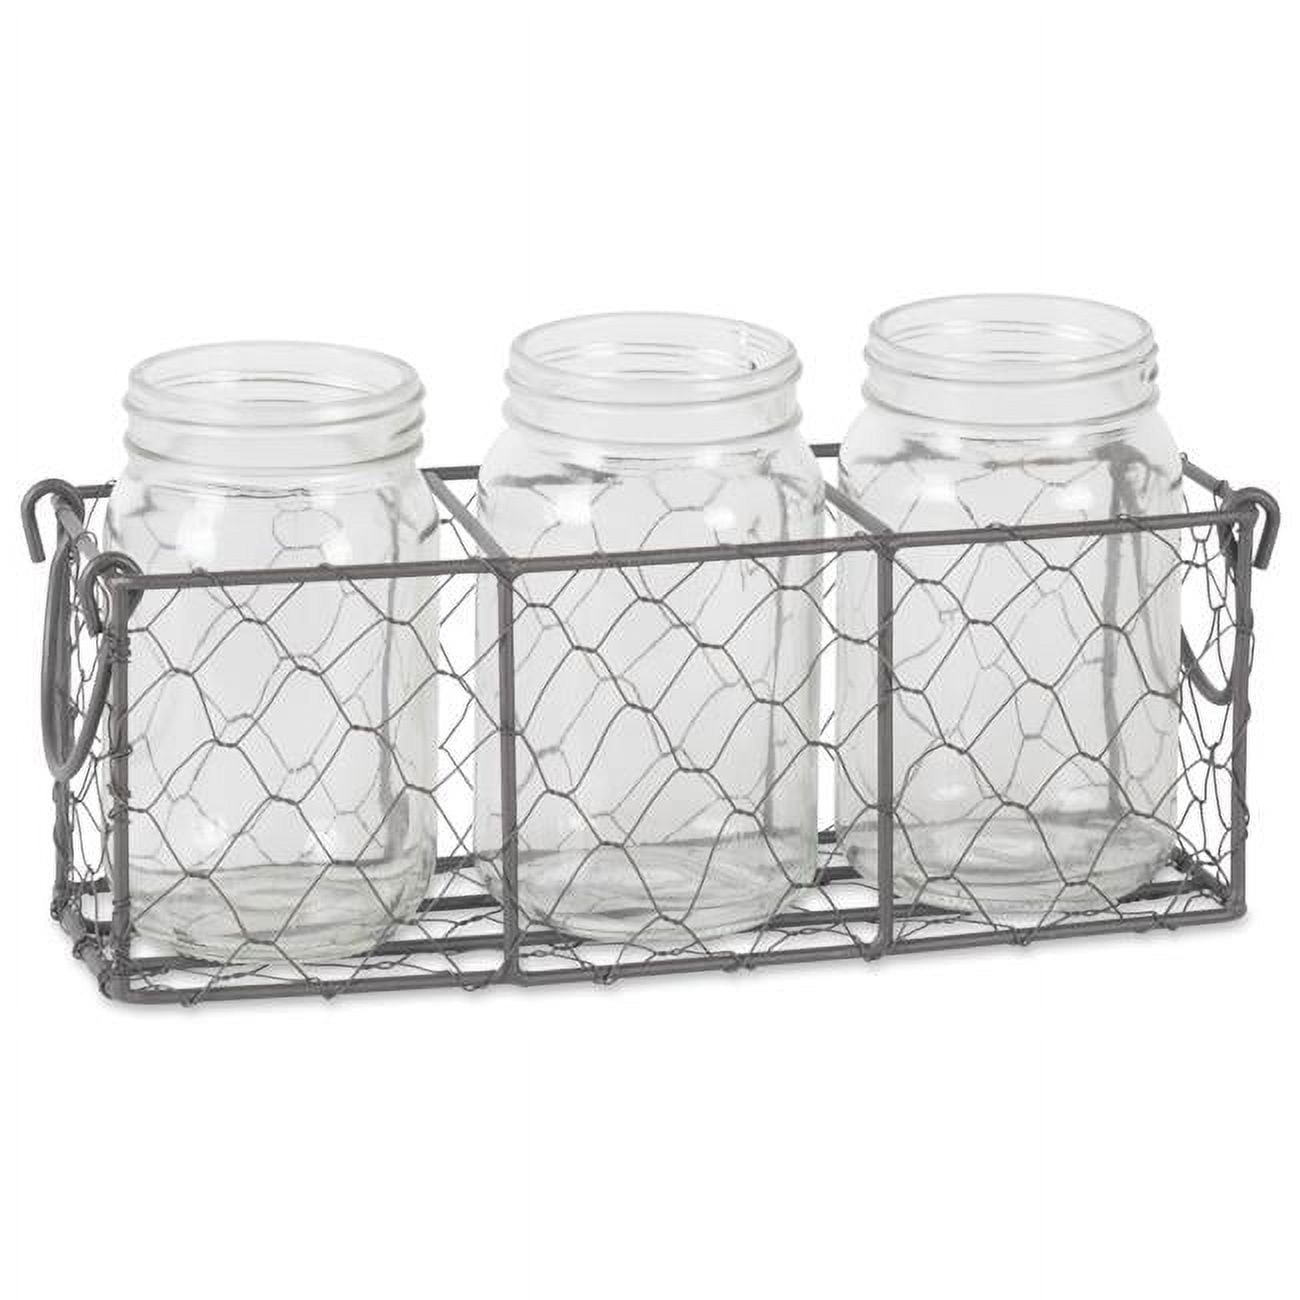 2 Roll Out Bottle Organization Bins - Pantry Under Sink Organizer With  Wheels & Handles - Clear Plastic Organizing Containers For Bottles, &  Cleaning